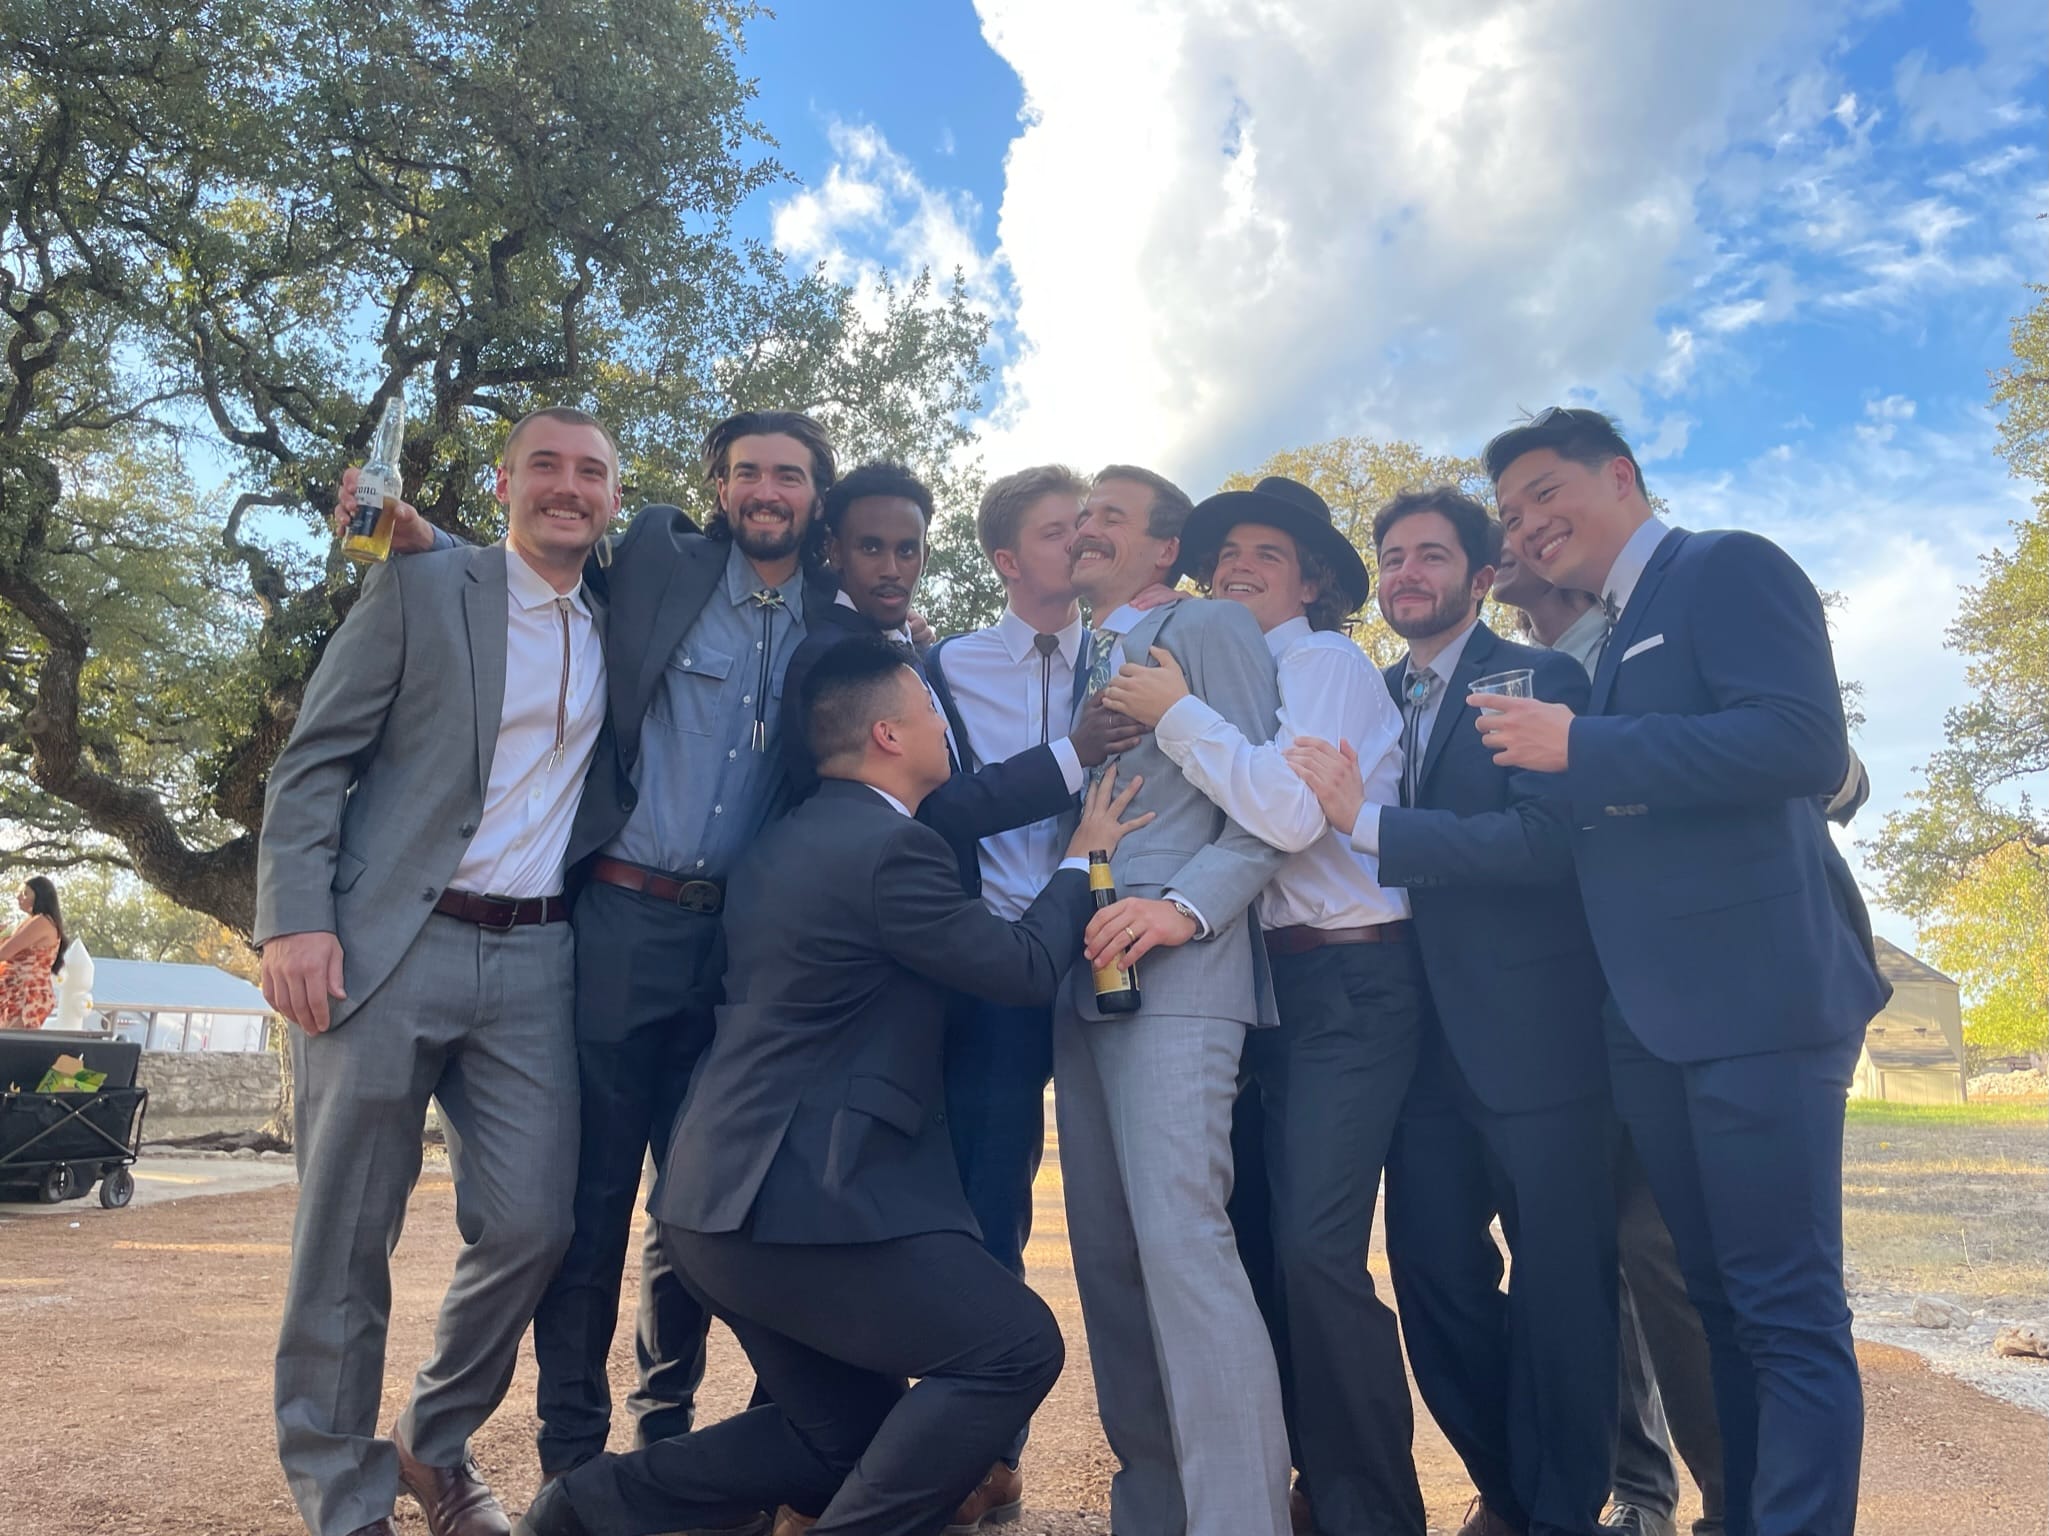 Samuel and a group of friends in suits before a wedding